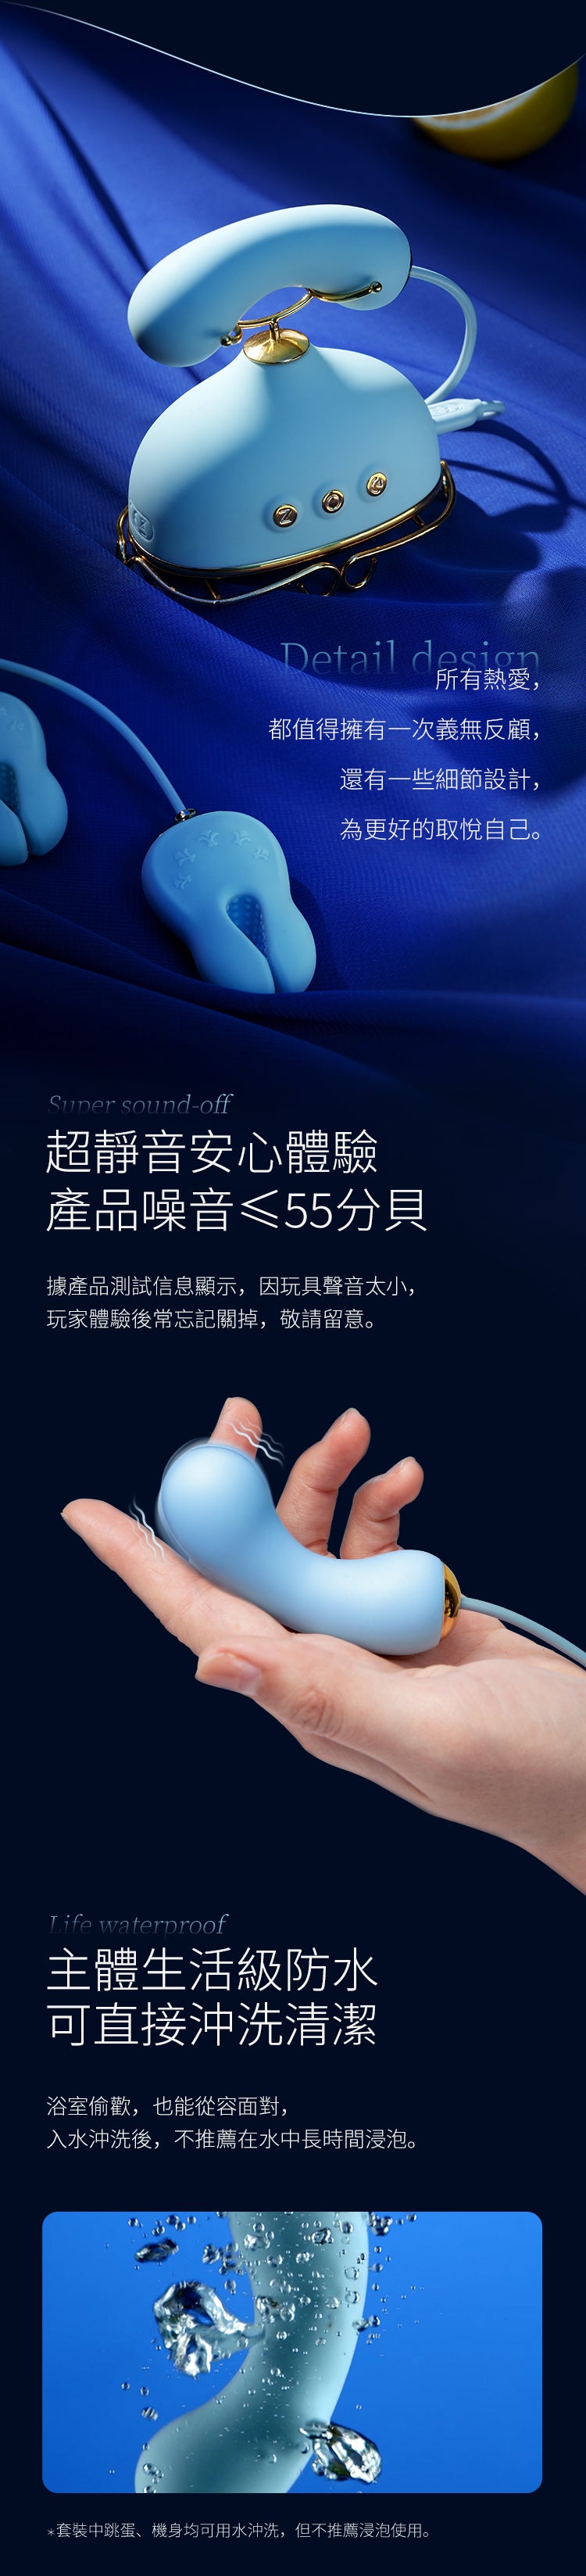 BeYourLover Taohua cute candy-colored jumping egg three-in-one multi-function vibration jumping egg phone sex toy